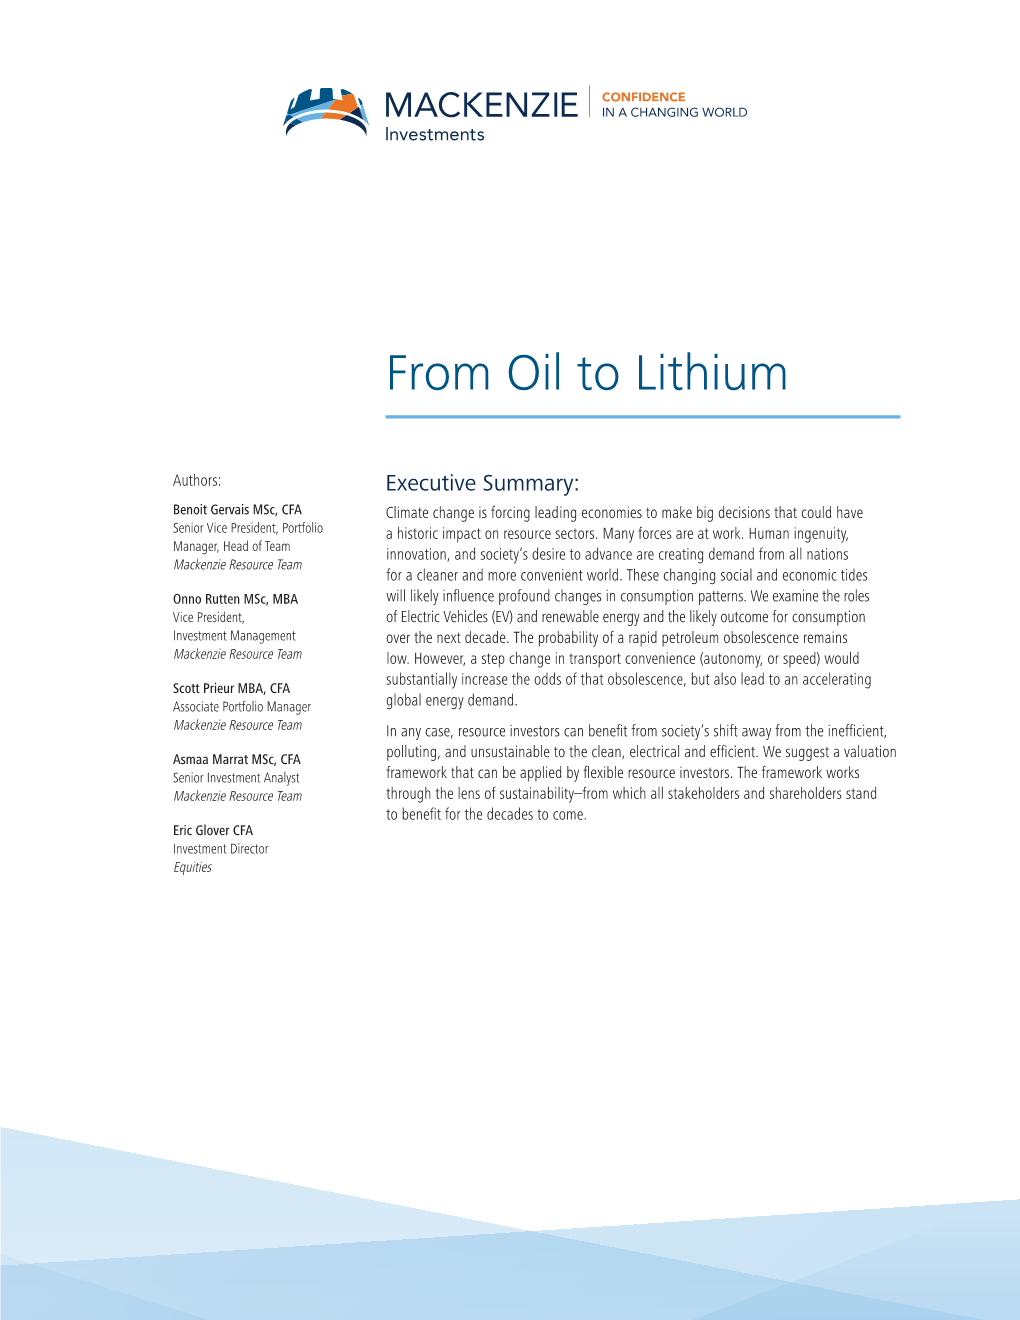 From Oil to Lithium